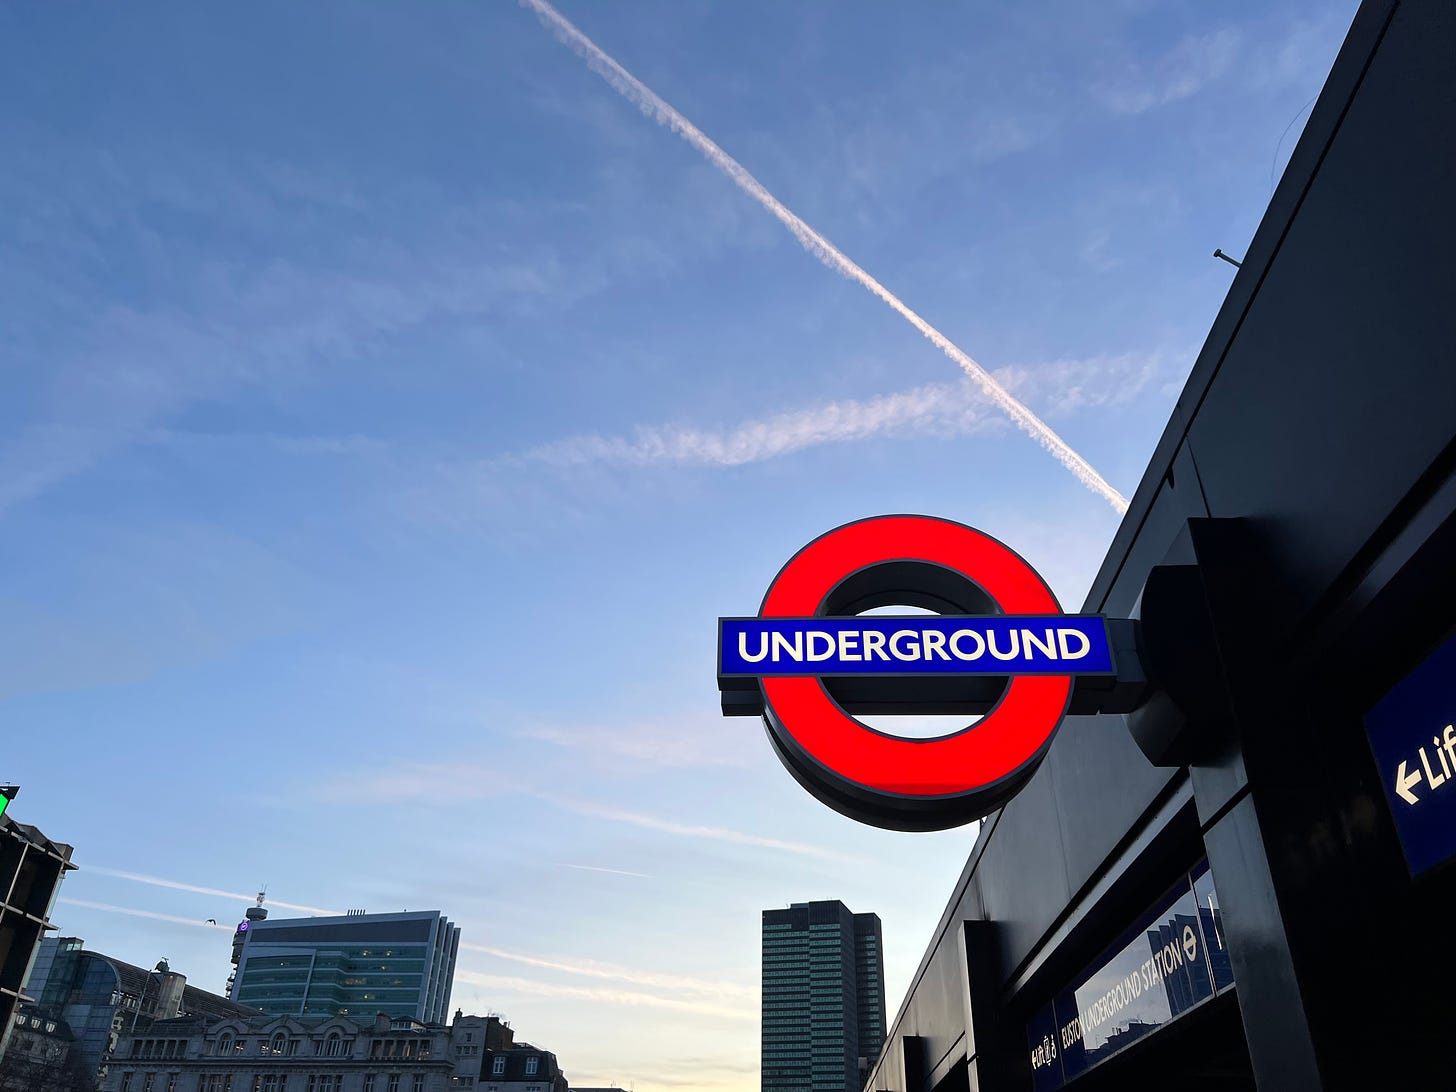 An Underground tube stop sign lit brightly against the blue late afternoon sky with London buildings in the distance